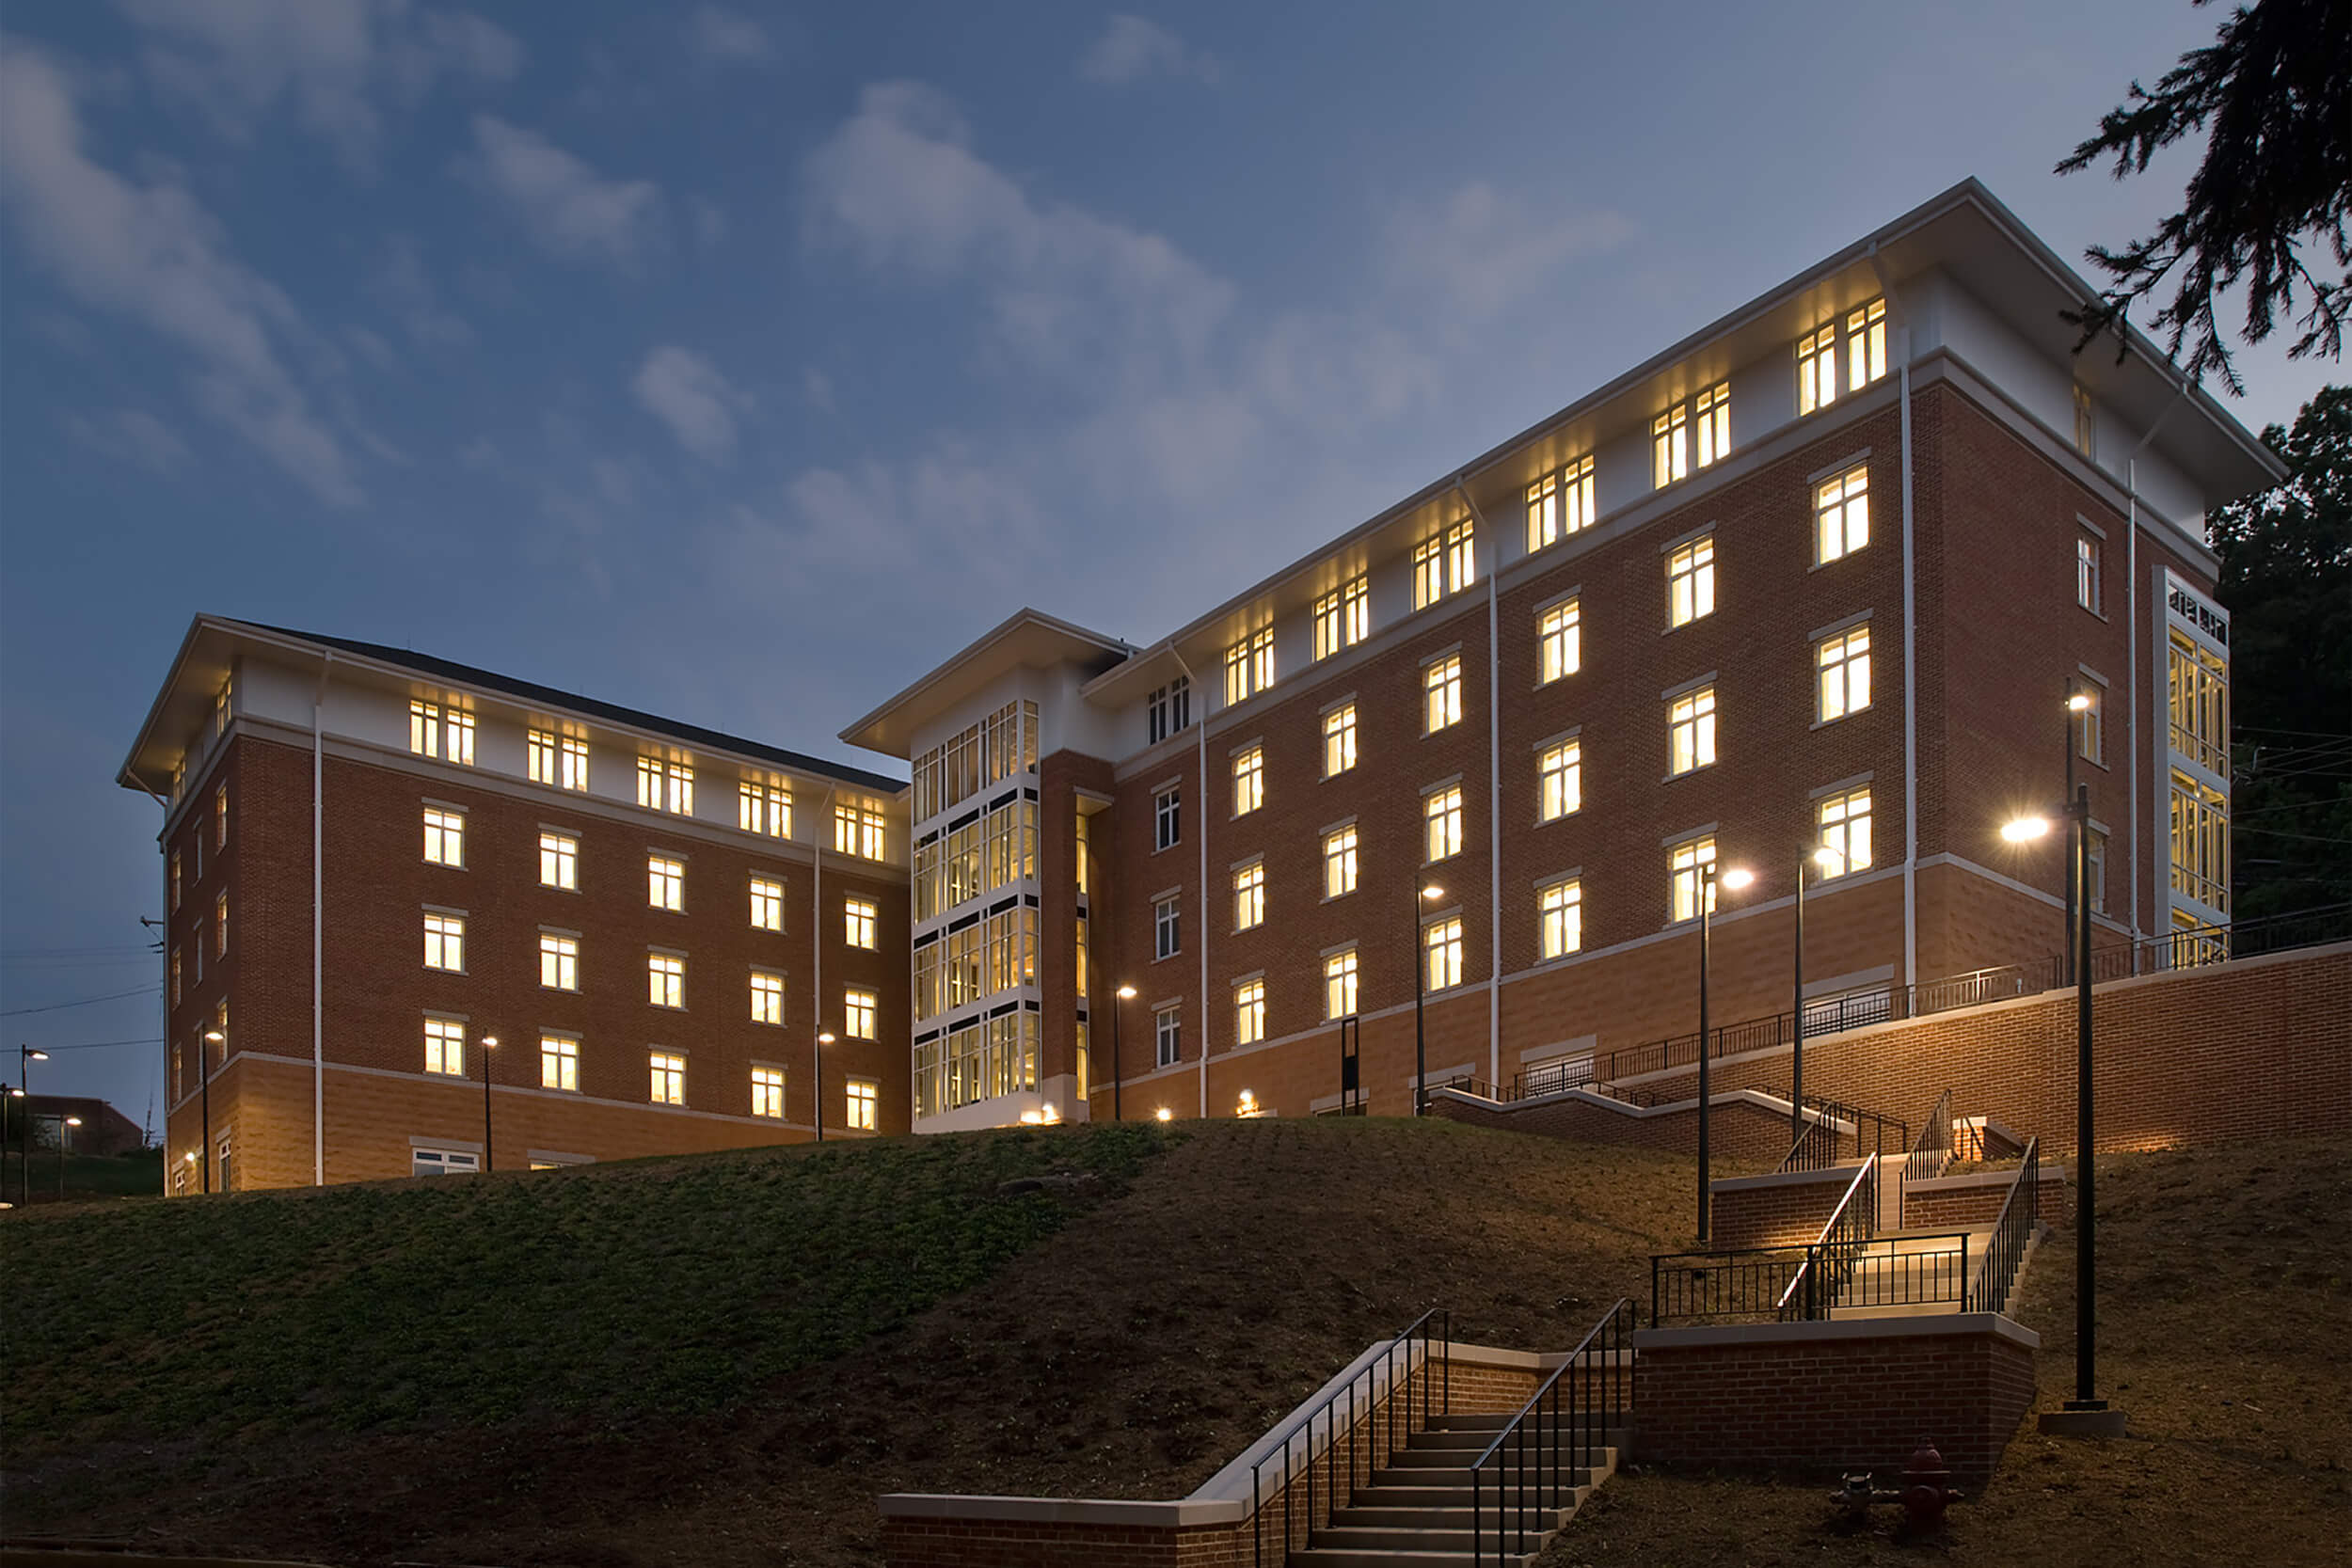 Exterior view of Kellogg House student residence building at University of Virginia. The photo is taken in the early evening and shows an angled view of the residence building and the stairway leading up to it. The building features a brown brick facade with white trim and windows, and lights are illuminating the building from within.